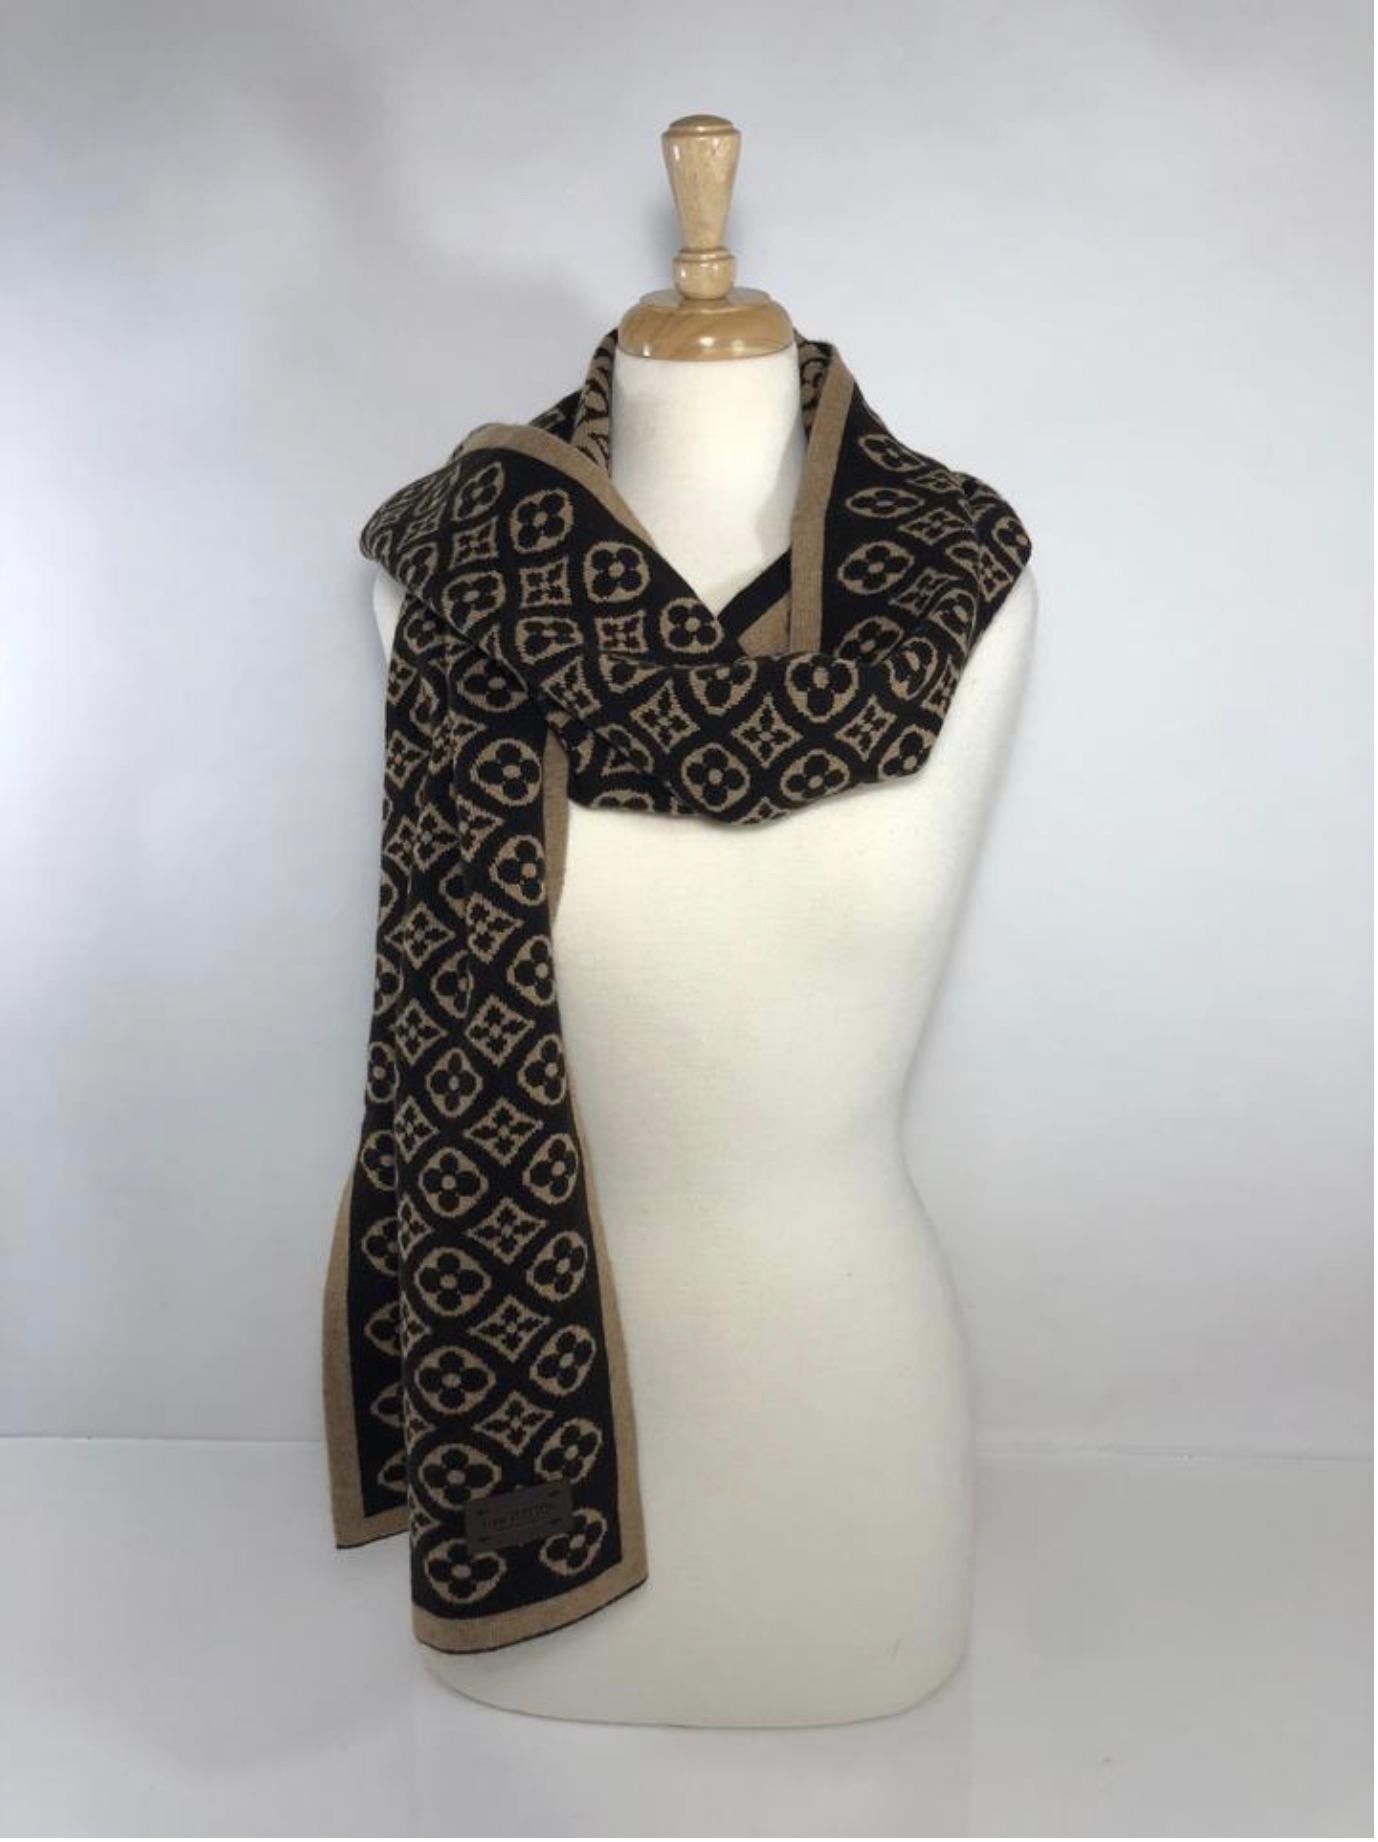 MODEL - Louis Vuitton Monogram Scarf

CONDITION - Exceptional! No signs of wear.

SKU - 2540

DATE/SERIAL CODE - NA

ORIGIN - Italy

PRODUCTION - NA

DIMENSIONS - L80 x H14 x D.2

STRAP/HANDLE DROP - NA

MATERIAL - 100% Cashmere

COMES WITH -